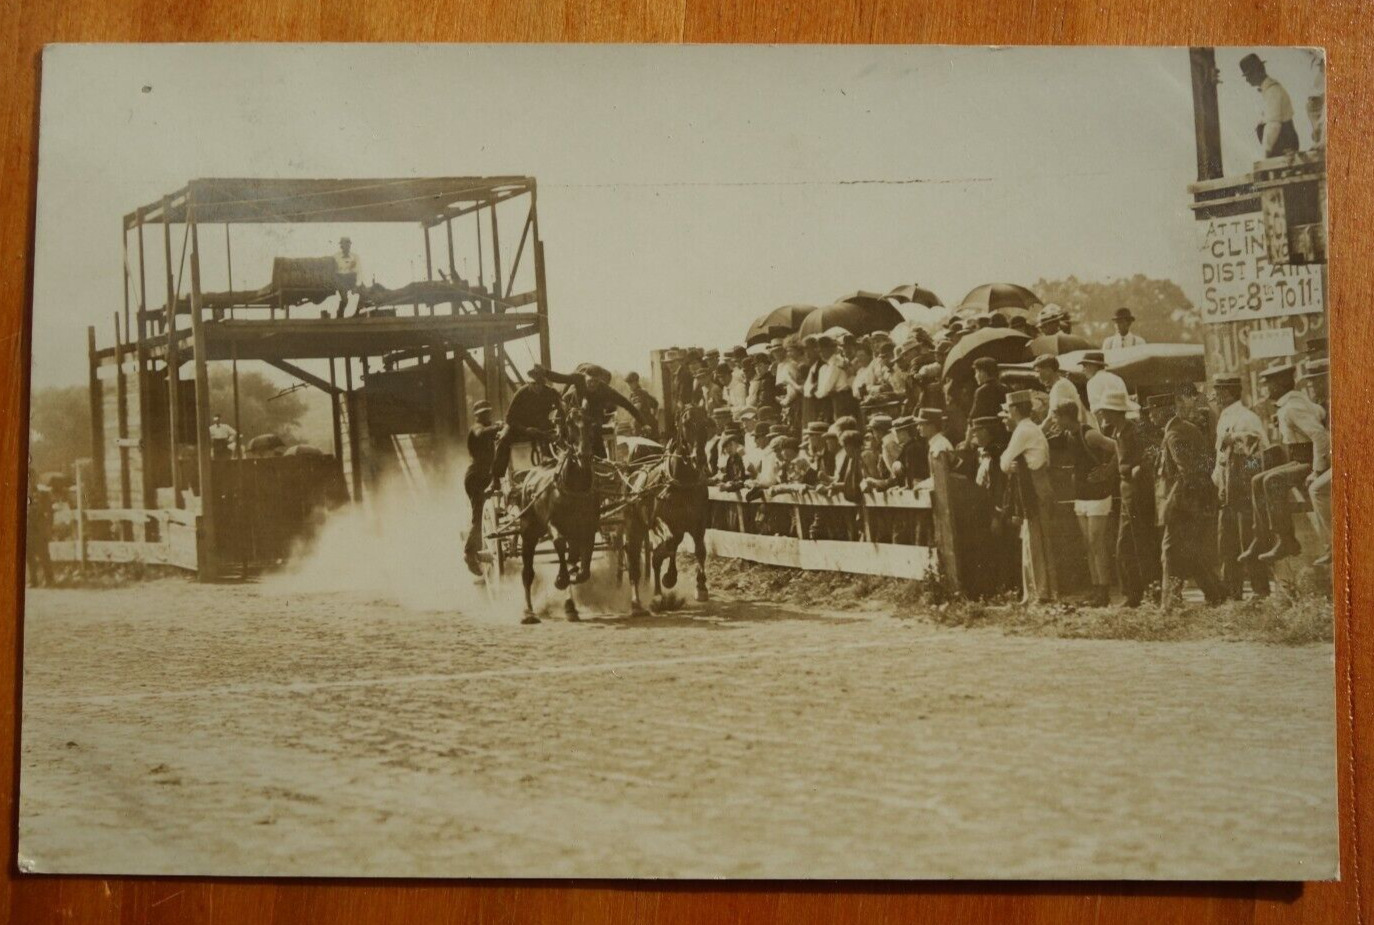 horses, team and wagon racetrack, couches on 2nd floor, rppc postcard real phoro